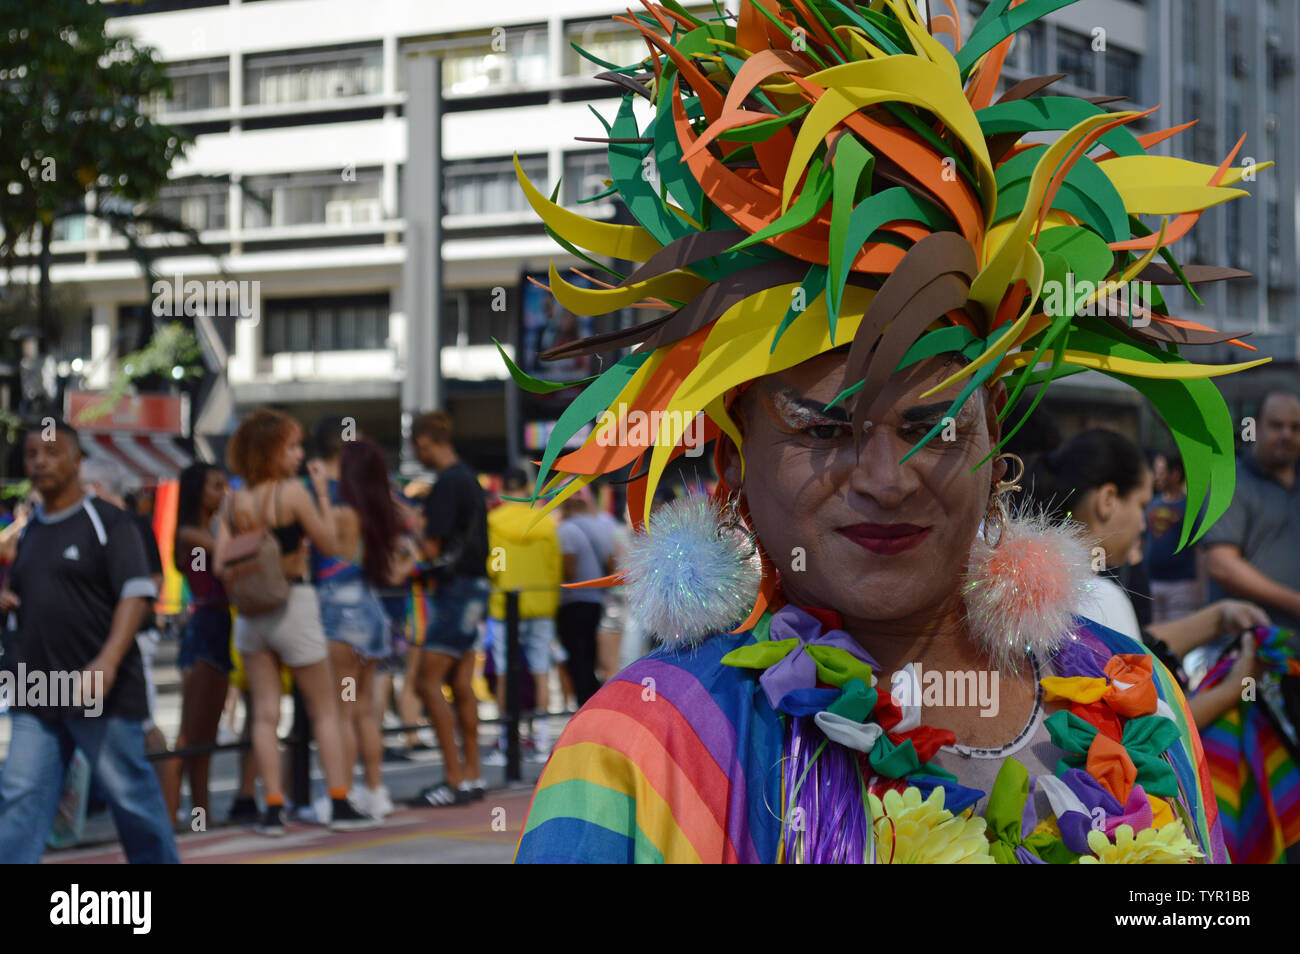 SÃO PAULO, SP - 23.06.2019: PARADA DEL ORGULLO LGBT 2019 - LGBT Manifestation. People have fun in trios during the 23rd Gay Pride Parade, on Avenida Paulista, central region of São Paulo. Event is considered one of the largest in the world of the genre. (Photo: Daniel Cymbalista/Fotoarena) Stock Photo